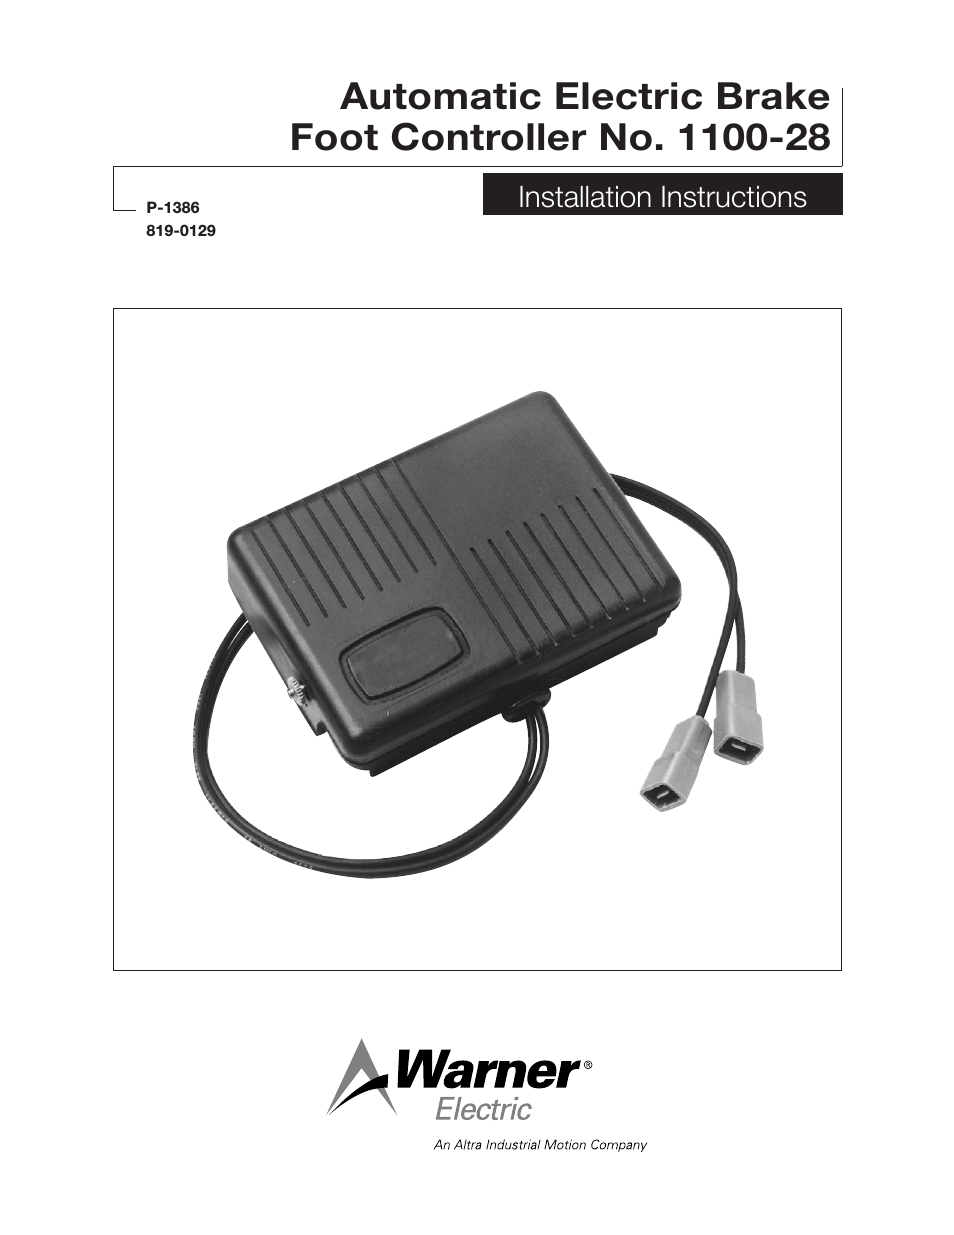 1100-28 Automatic Electric Brake Foot Controller